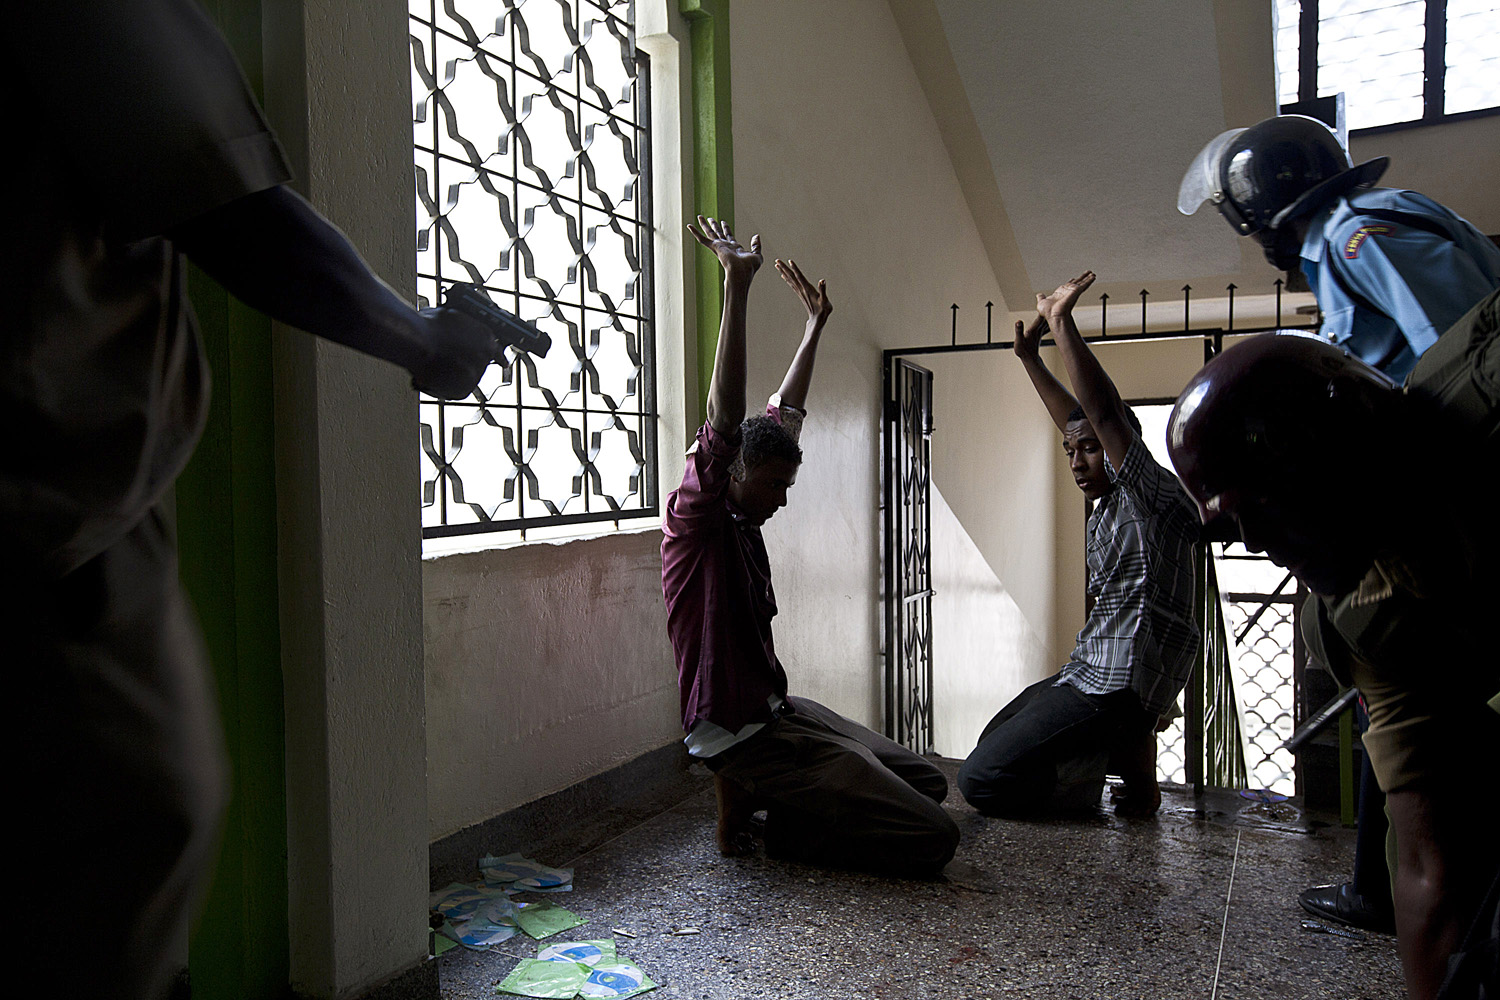 Feb. 2, 2014. Alleged jihadist youths are apprehended by police during a raid inside the Masjid Mussa mosque in the Majengo area of Mombasa, Kenya.